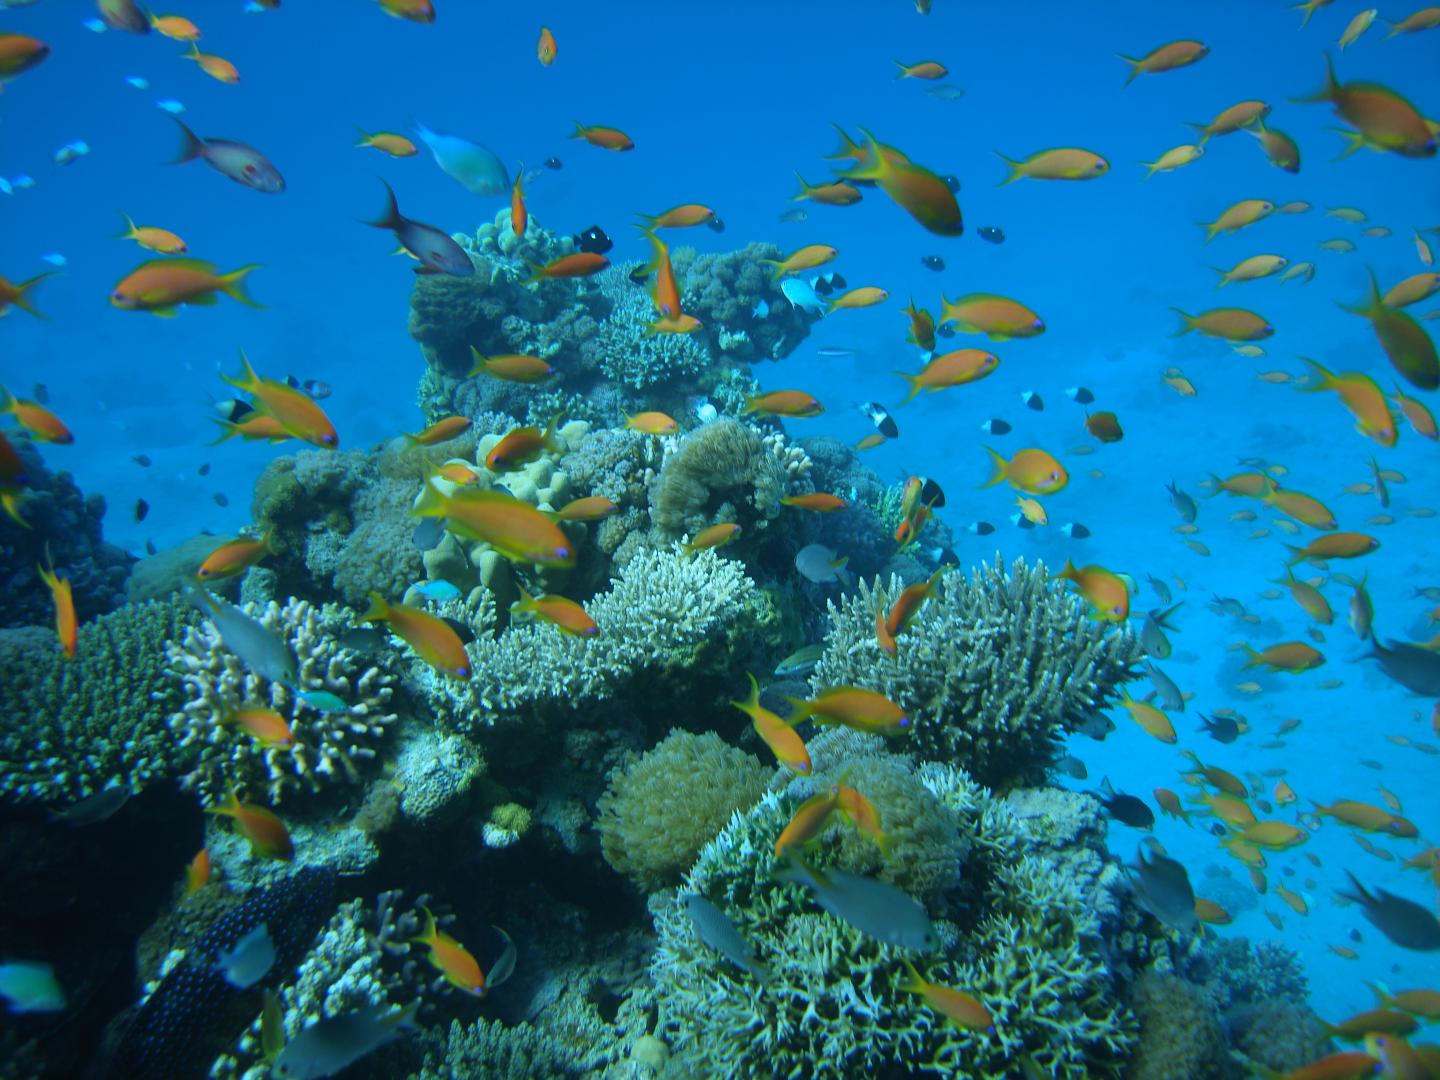 Coral Reefs in the Gulf of Aqaba